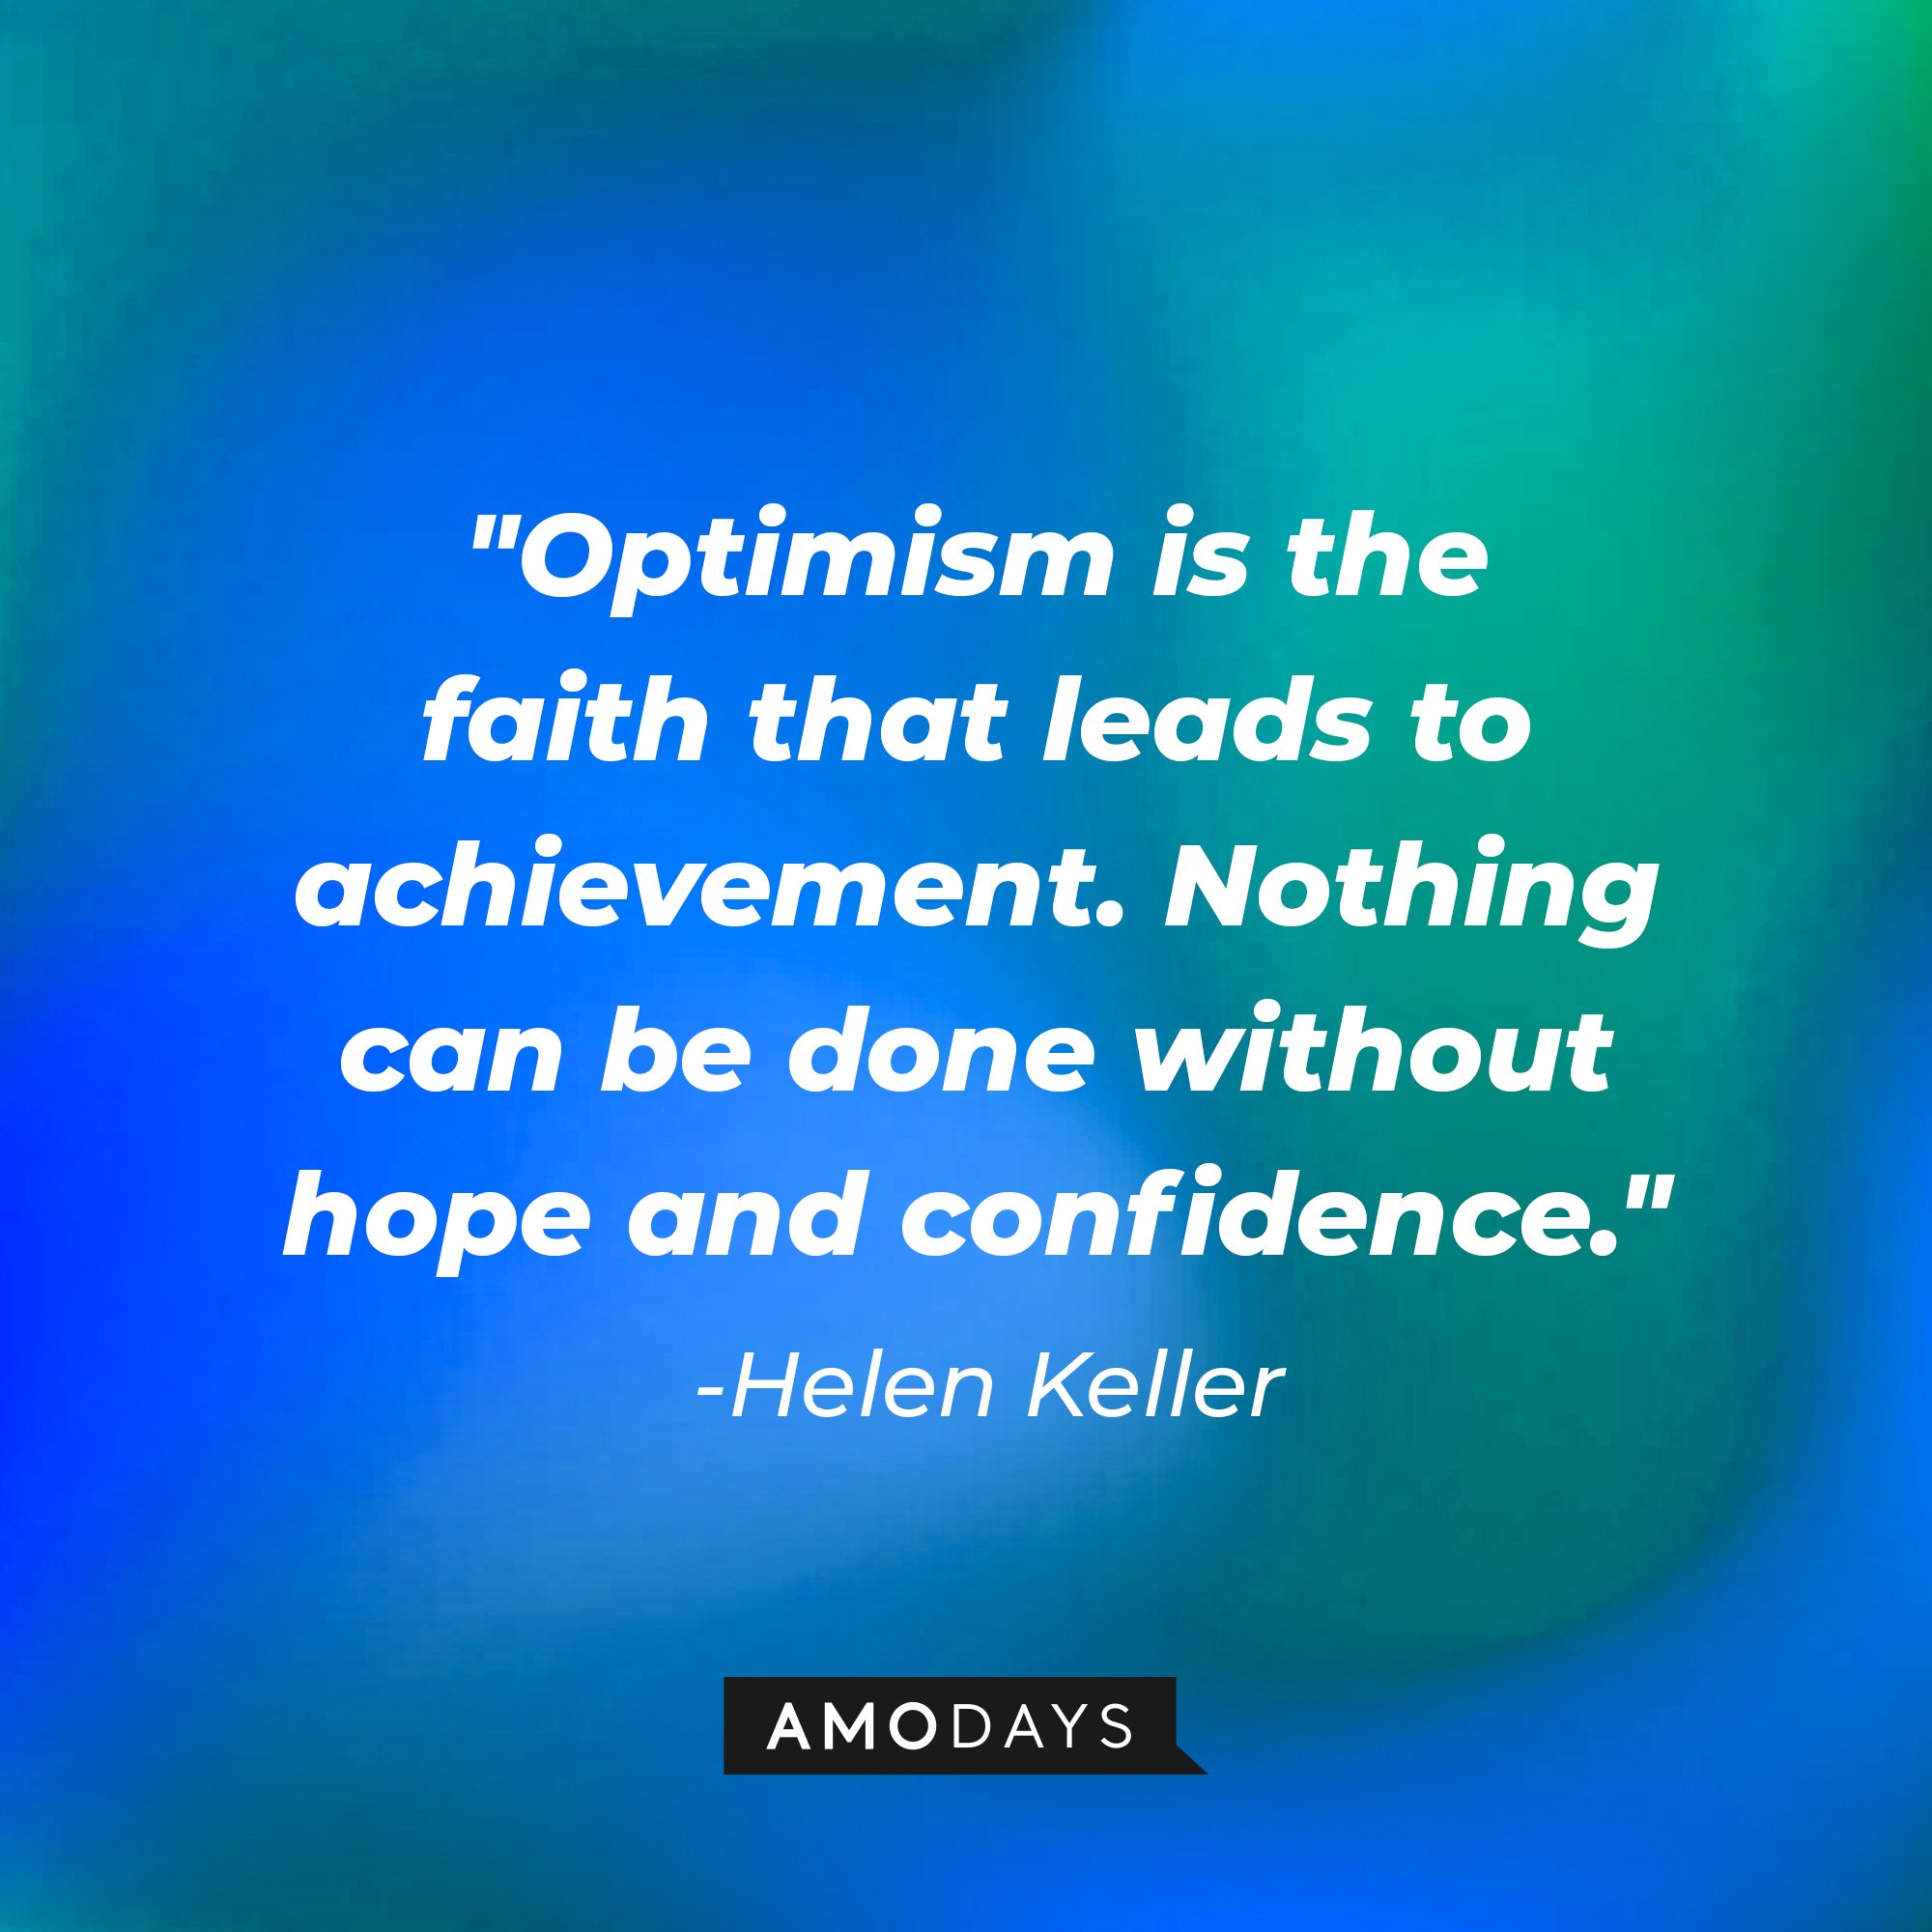 Helen Keller's quote: "Optimism is the faith that leads to achievement. Nothing can be done without hope and confidence." | Image: AmoDays